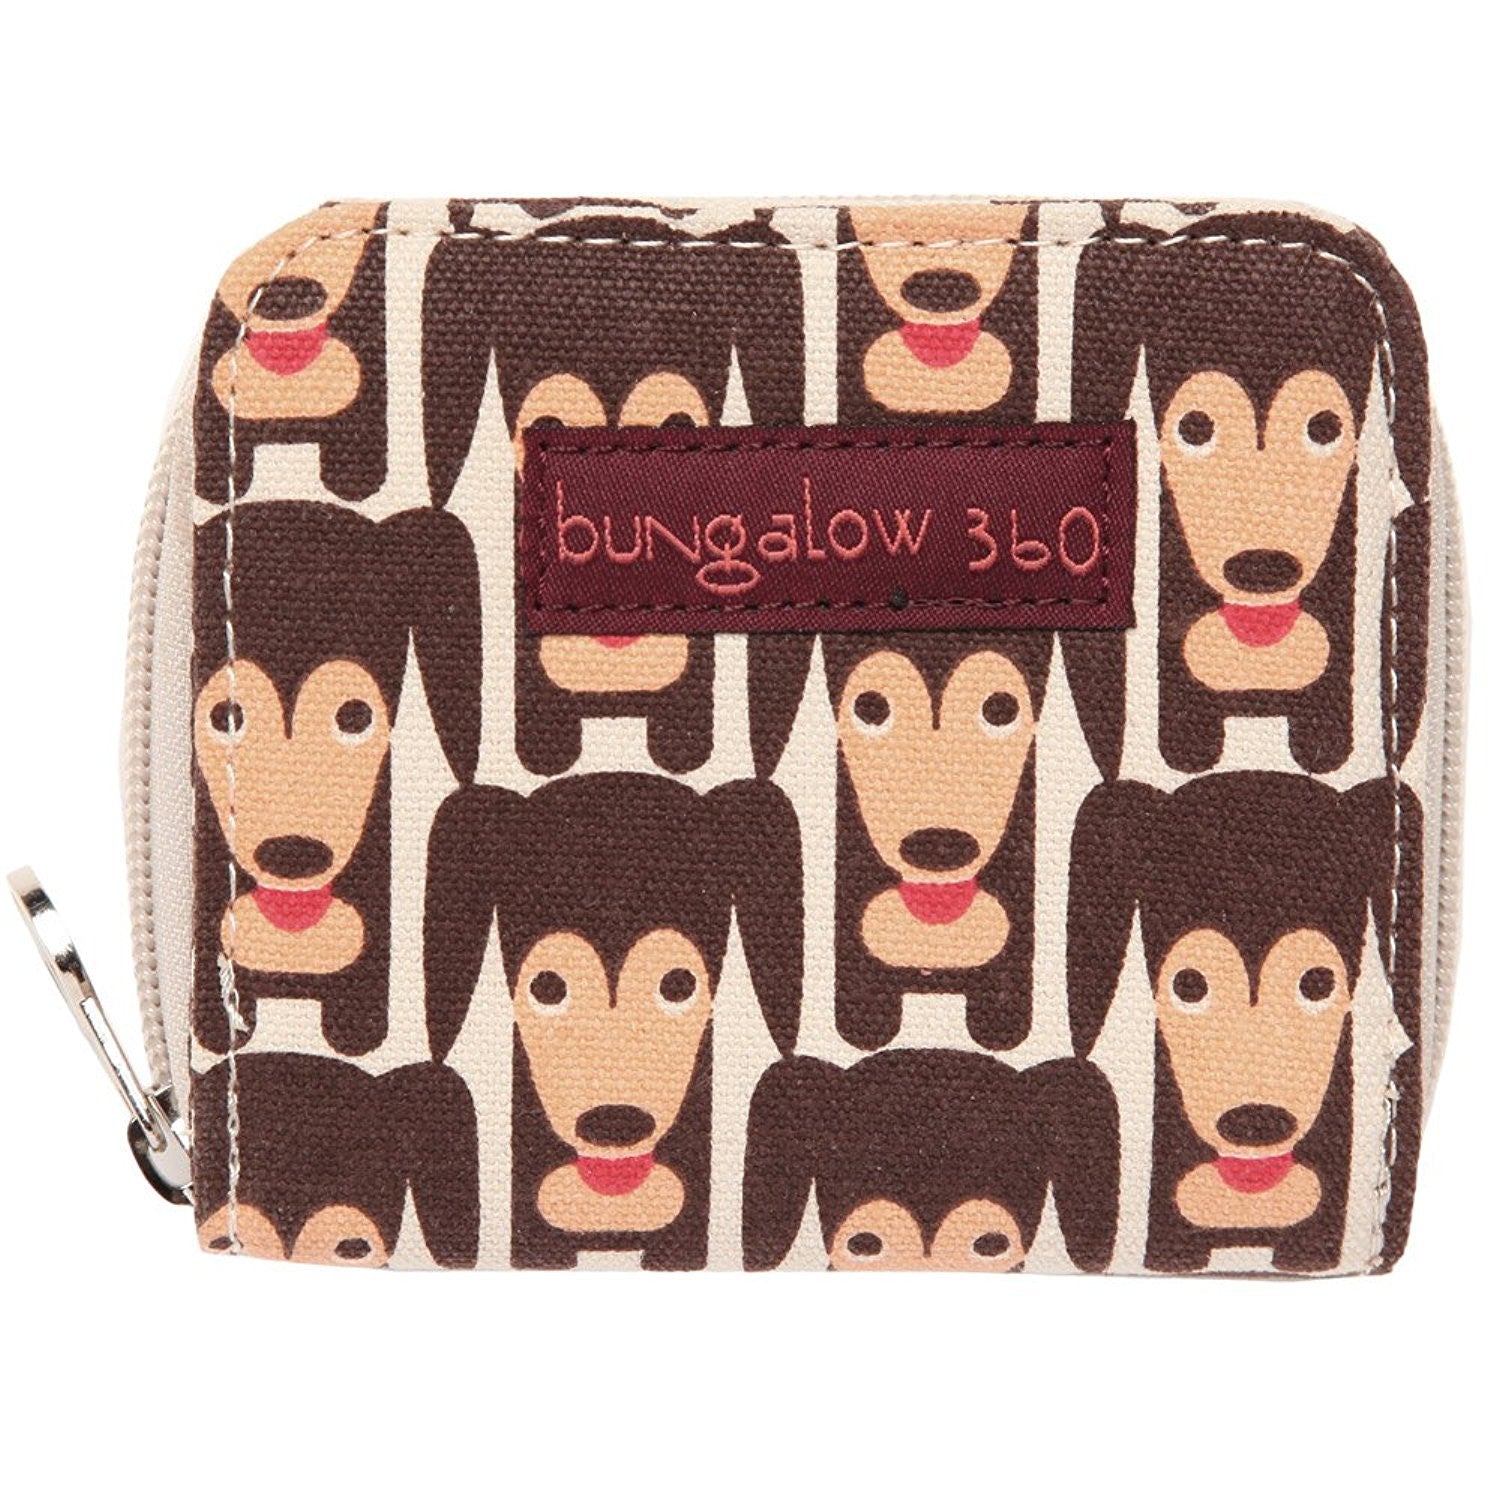 Billfold Wallet by Bungalow360 - Compassionate Closet